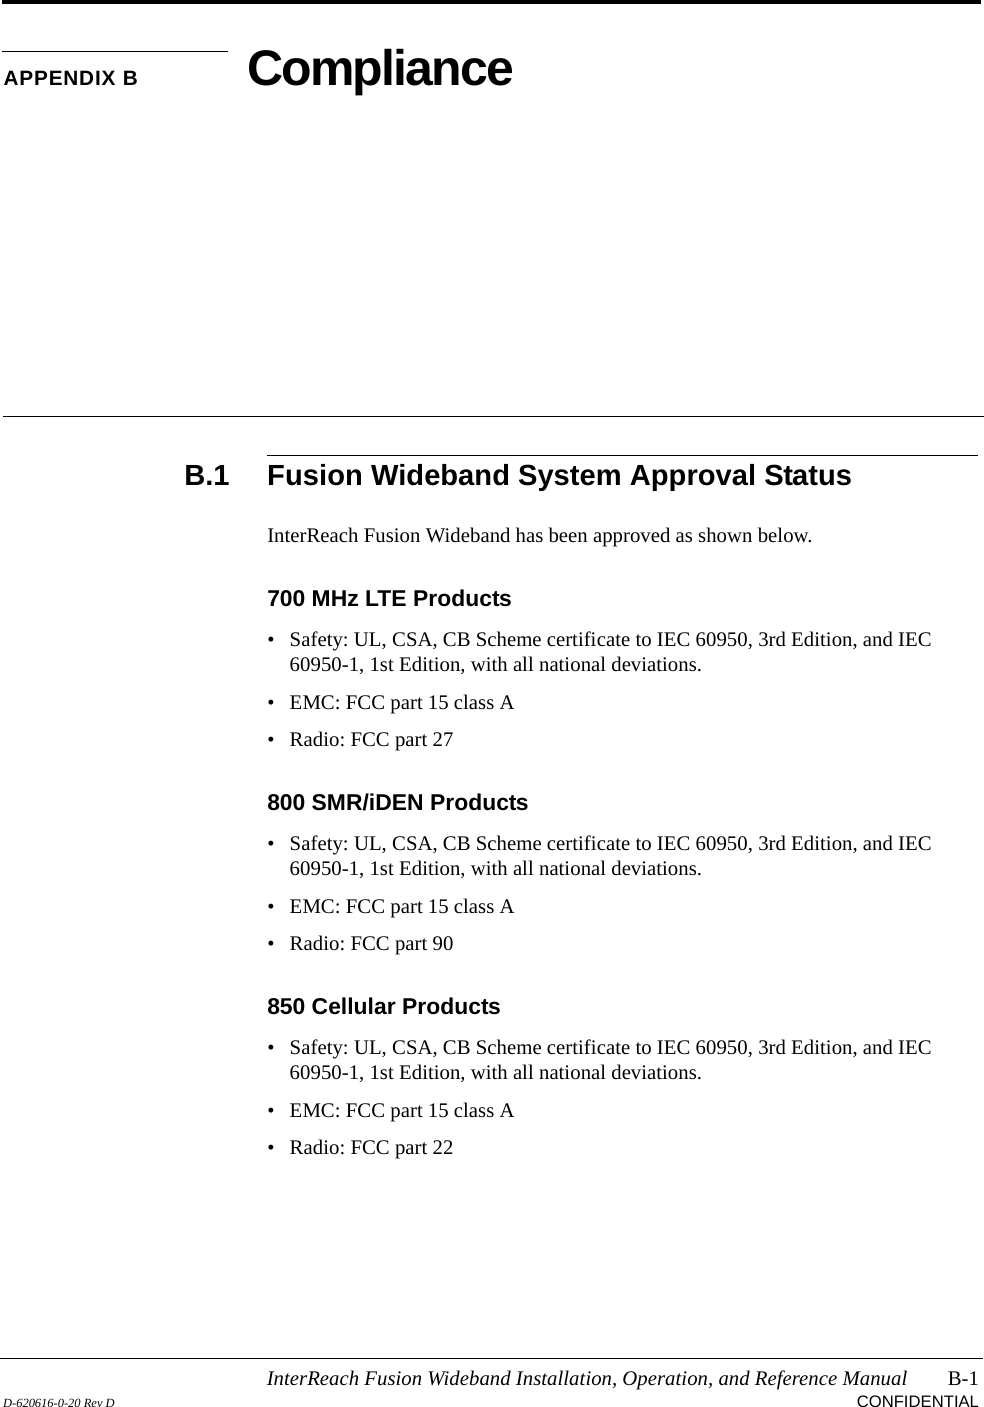 InterReach Fusion Wideband Installation, Operation, and Reference Manual B-1D-620616-0-20 Rev D CONFIDENTIALAPPENDIX B ComplianceB.1 Fusion Wideband System Approval StatusInterReach Fusion Wideband has been approved as shown below.700 MHz LTE Products• Safety: UL, CSA, CB Scheme certificate to IEC 60950, 3rd Edition, and IEC 60950-1, 1st Edition, with all national deviations.• EMC: FCC part 15 class A• Radio: FCC part 27800 SMR/iDEN Products• Safety: UL, CSA, CB Scheme certificate to IEC 60950, 3rd Edition, and IEC 60950-1, 1st Edition, with all national deviations.• EMC: FCC part 15 class A• Radio: FCC part 90850 Cellular Products• Safety: UL, CSA, CB Scheme certificate to IEC 60950, 3rd Edition, and IEC 60950-1, 1st Edition, with all national deviations.• EMC: FCC part 15 class A• Radio: FCC part 22